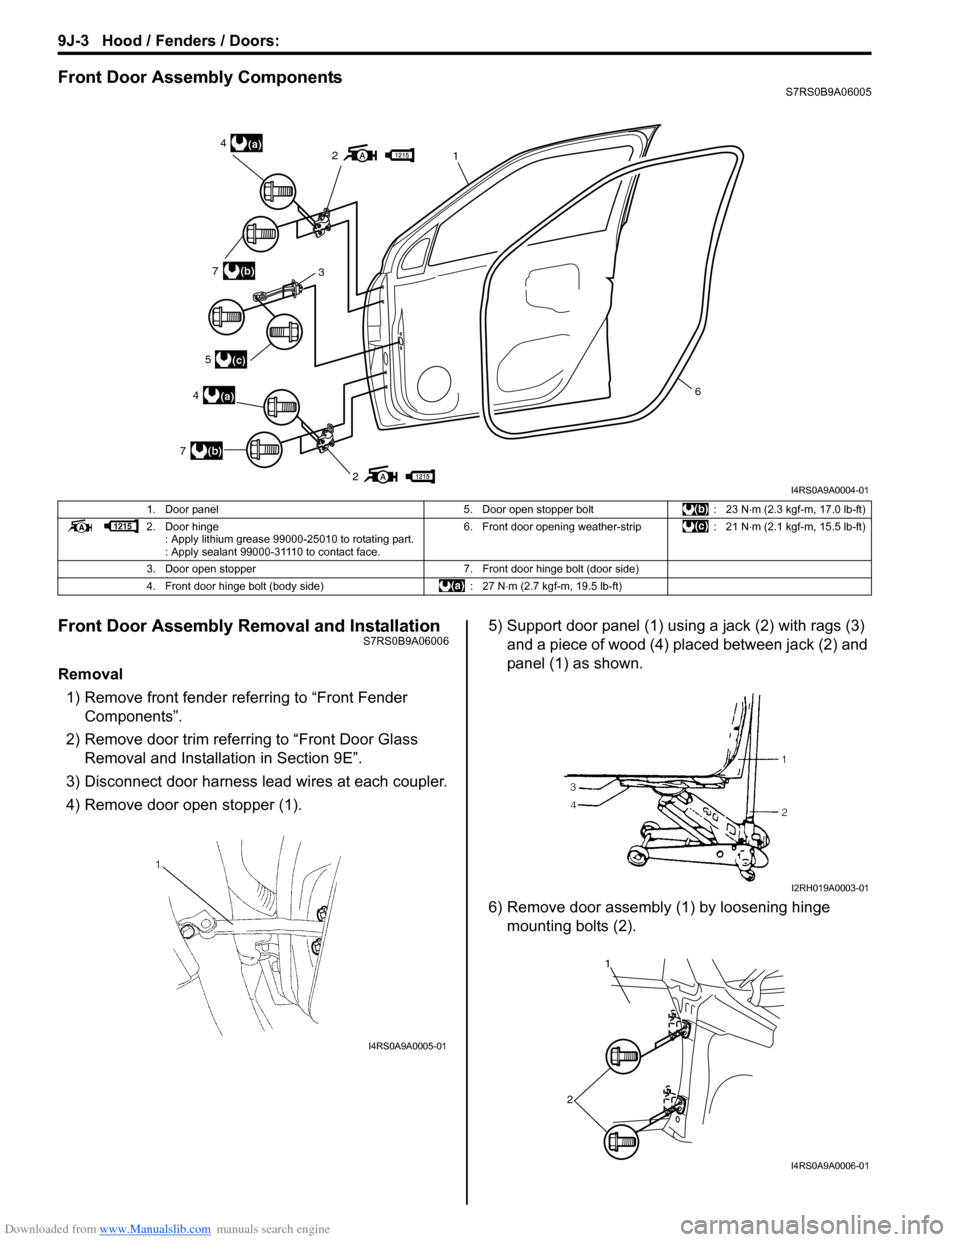 SUZUKI SWIFT 2008 2.G Service Workshop Manual Downloaded from www.Manualslib.com manuals search engine 9J-3 Hood / Fenders / Doors: 
Front Door Assembly ComponentsS7RS0B9A06005
Front Door Assembly Removal and InstallationS7RS0B9A06006
Removal1) R